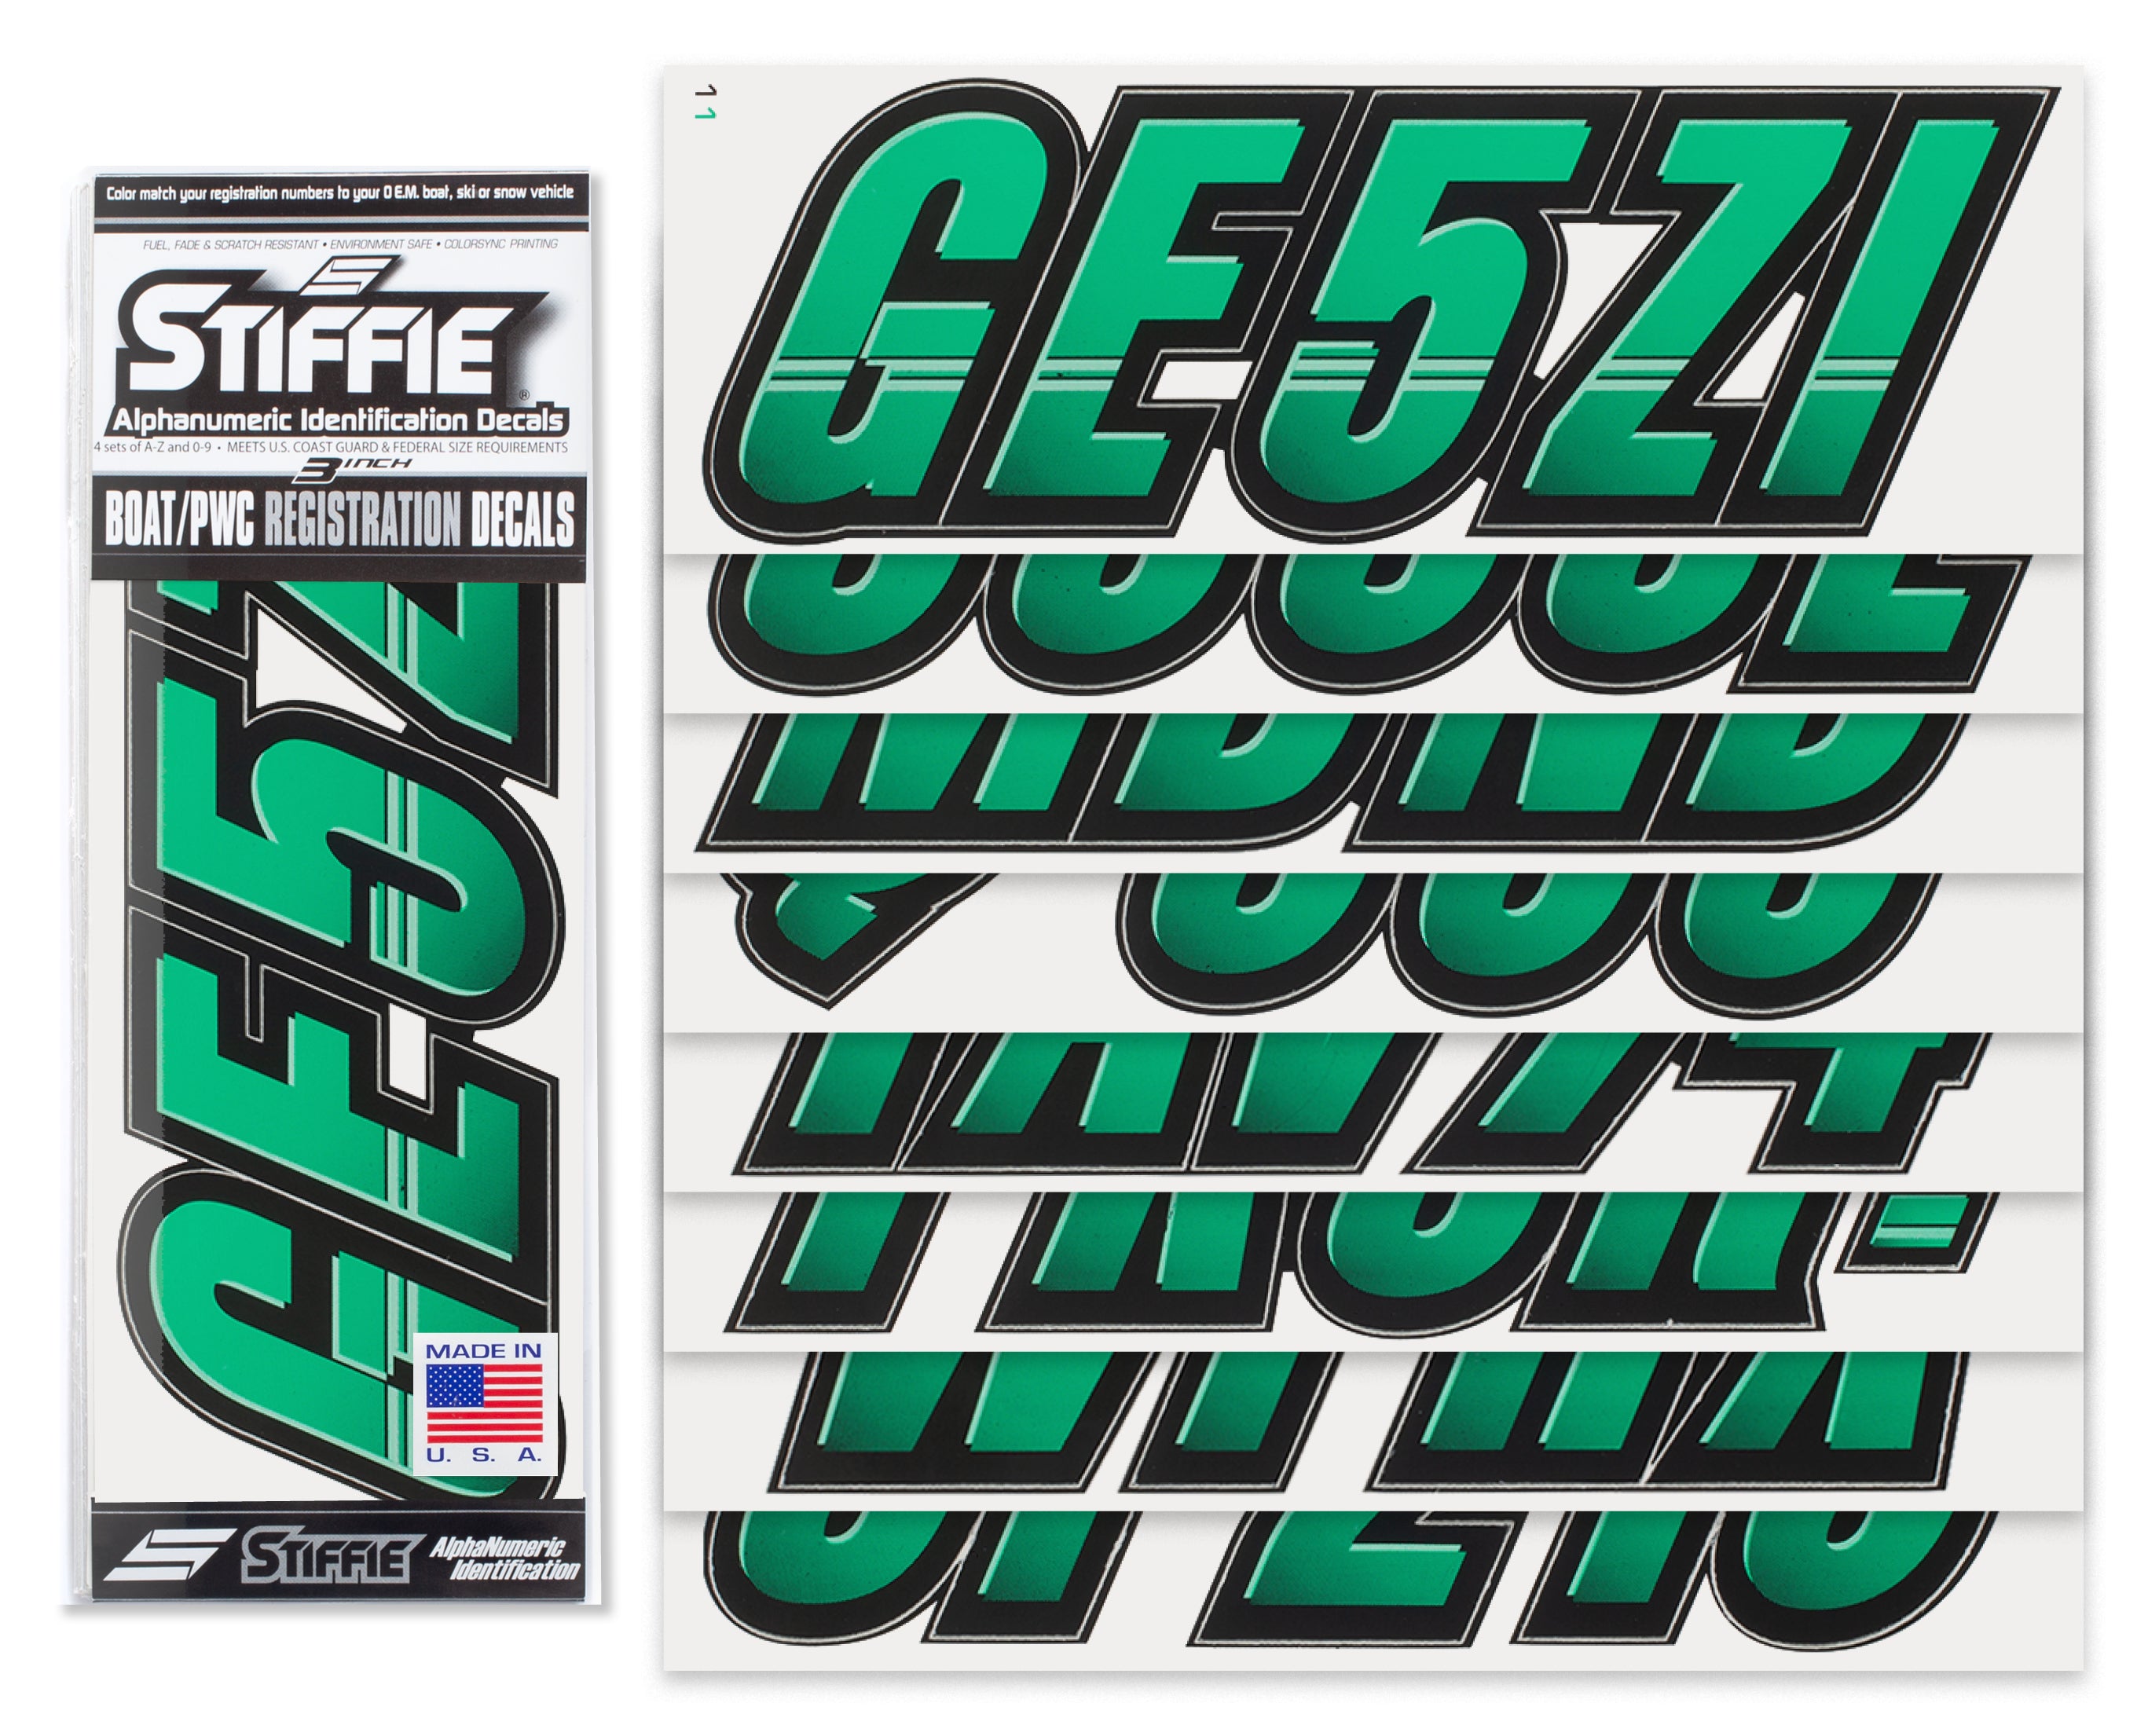 Stiffie Techtron Seafoam Green/Black 3" Alpha-Numeric Registration Identification Numbers Stickers Decals for Boats & Personal Watercraft